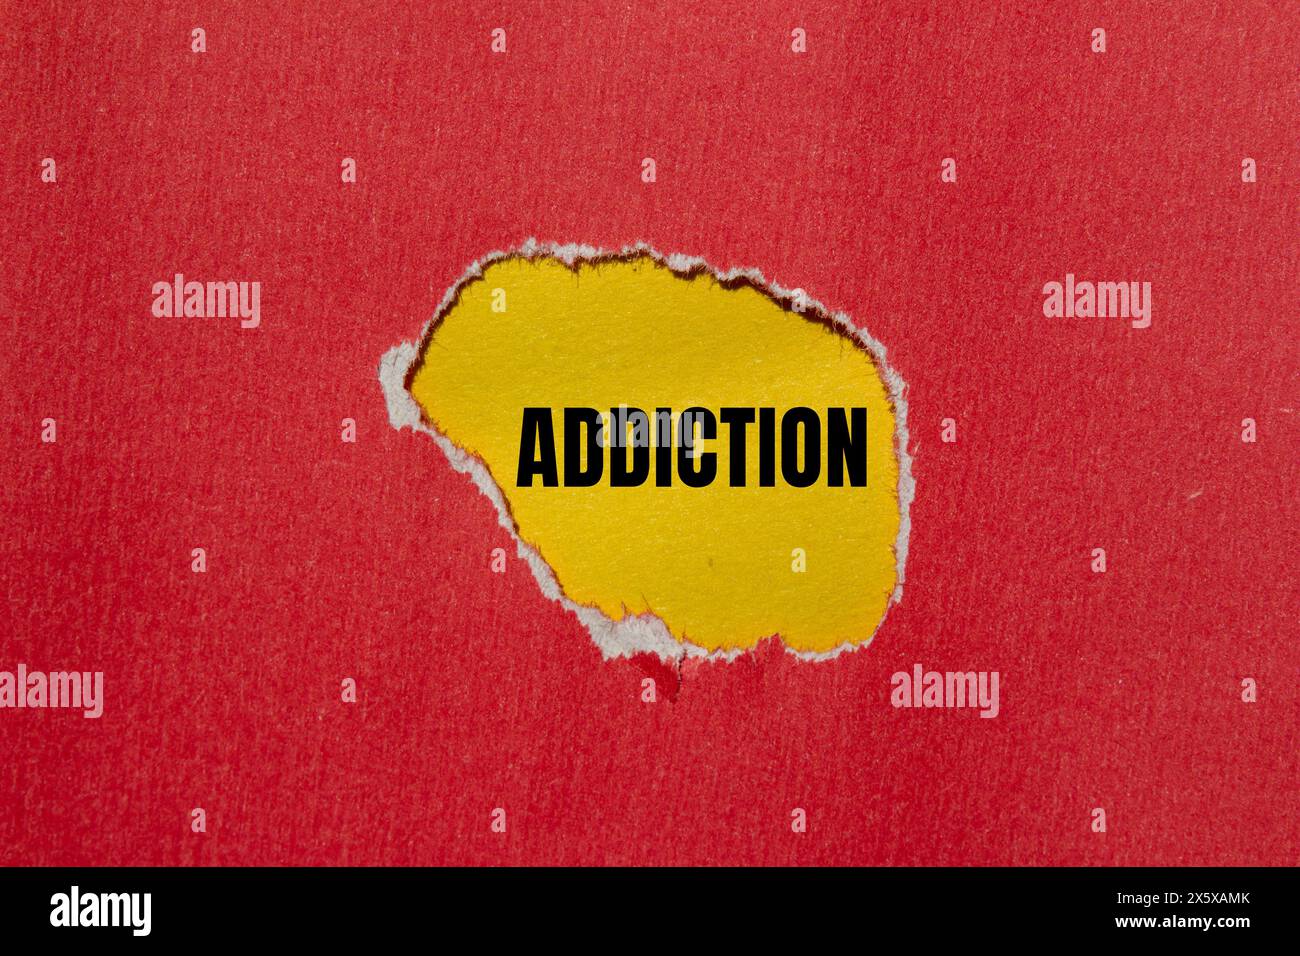 Addiction word written on ripped red paper with yellow background. Conceptual addiction word symbol. Copy space. Stock Photo